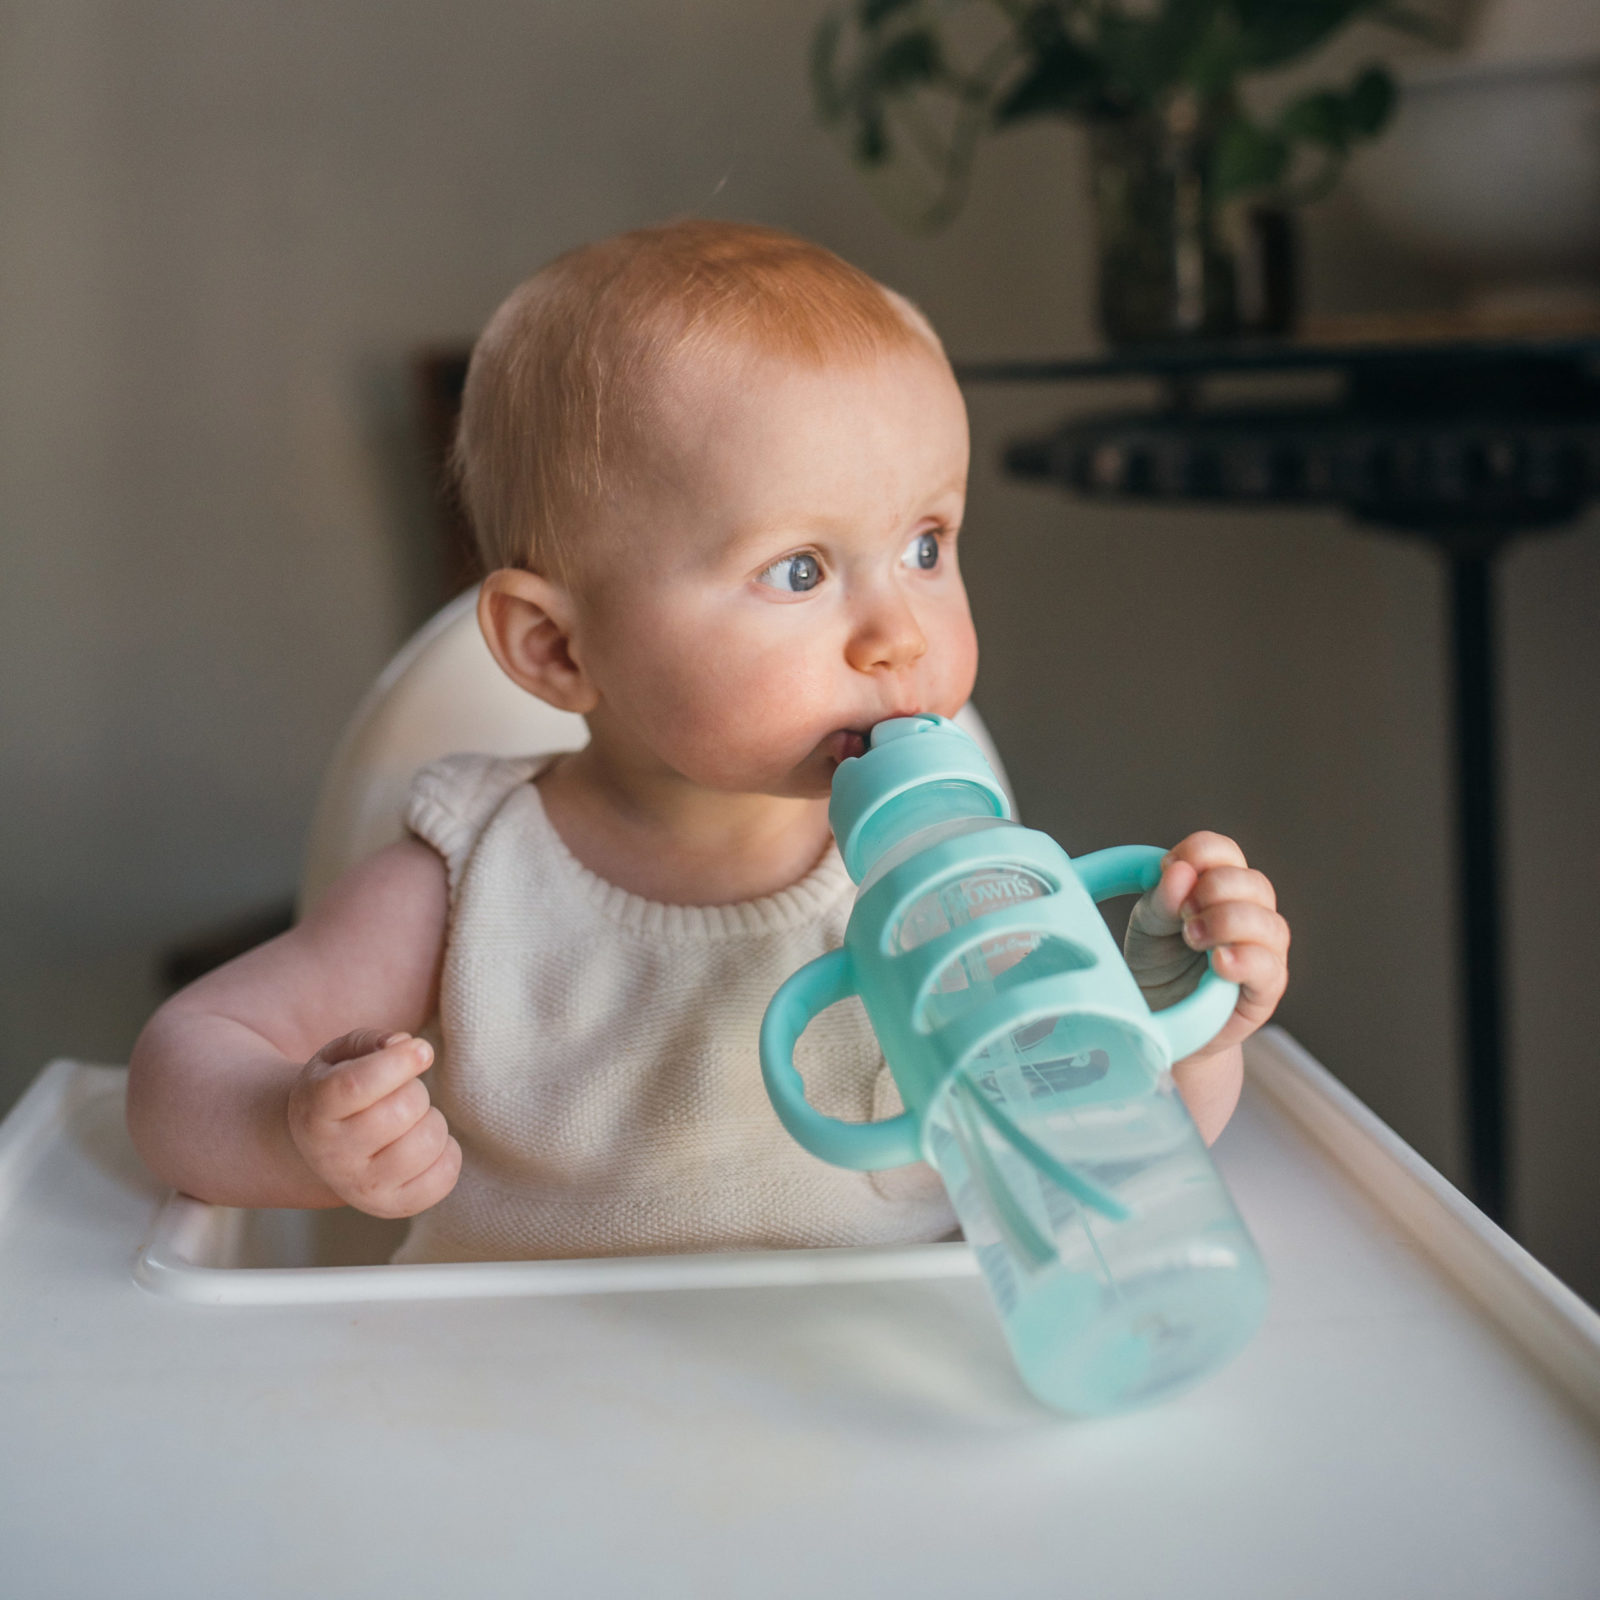 https://www.drbrownsbaby.com/wp-content/uploads/2021/01/Lifestyle_Sippy-Straw-Bottle_Green_2-1-scaled.jpg